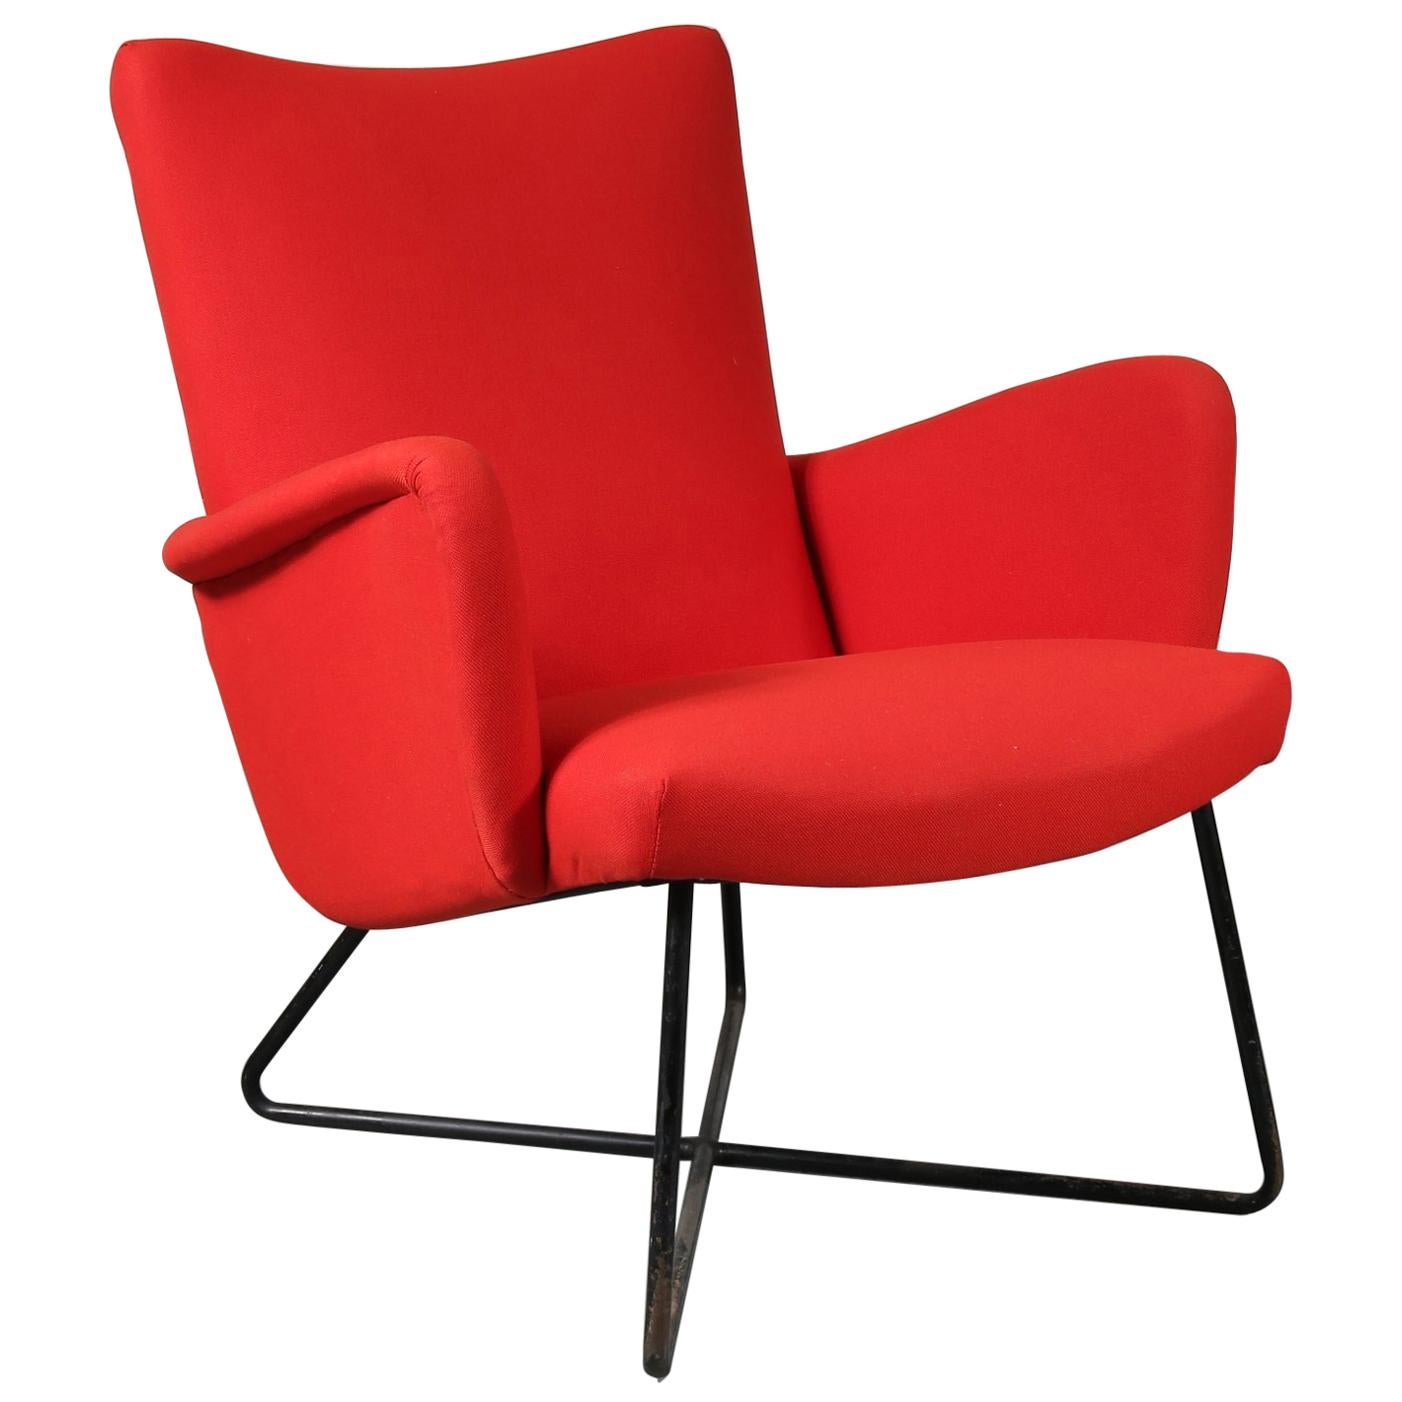 Grete Jalk Attributed Lounge Chair, circa 1950